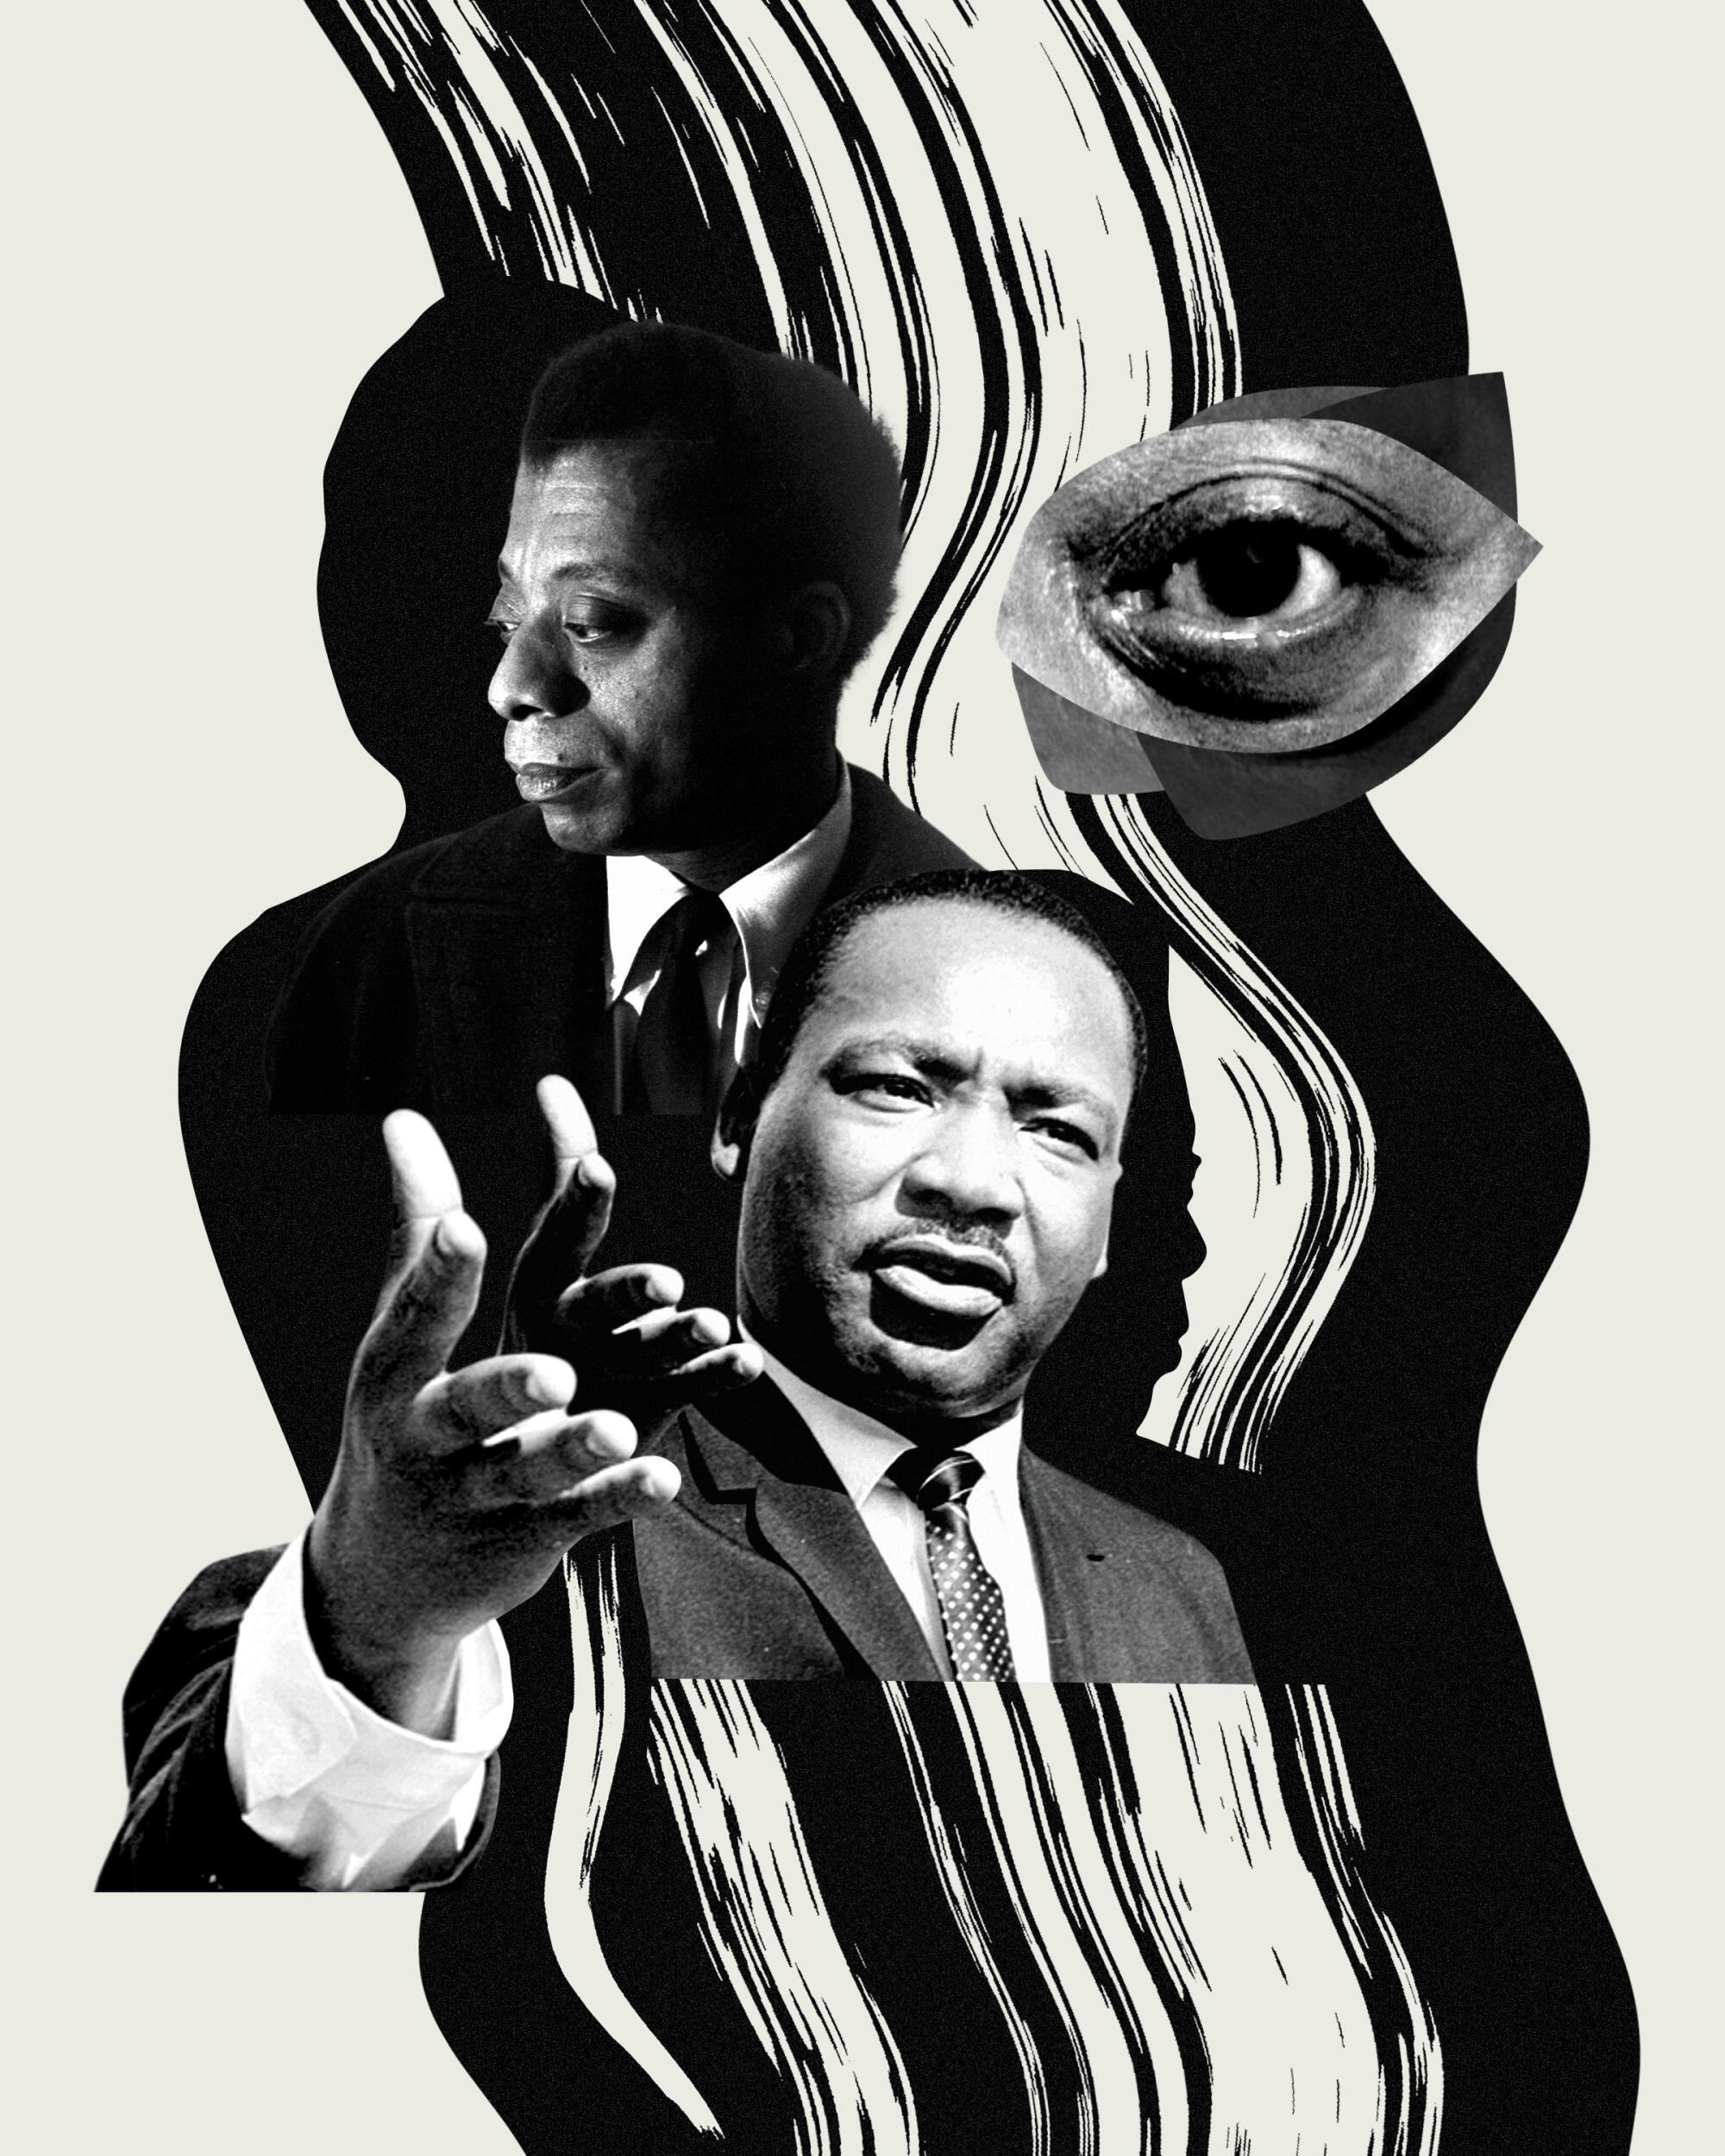 A black and off-white collage using archival photos of James Baldwin and Martin Luther King Jr. on top of a wave pattern